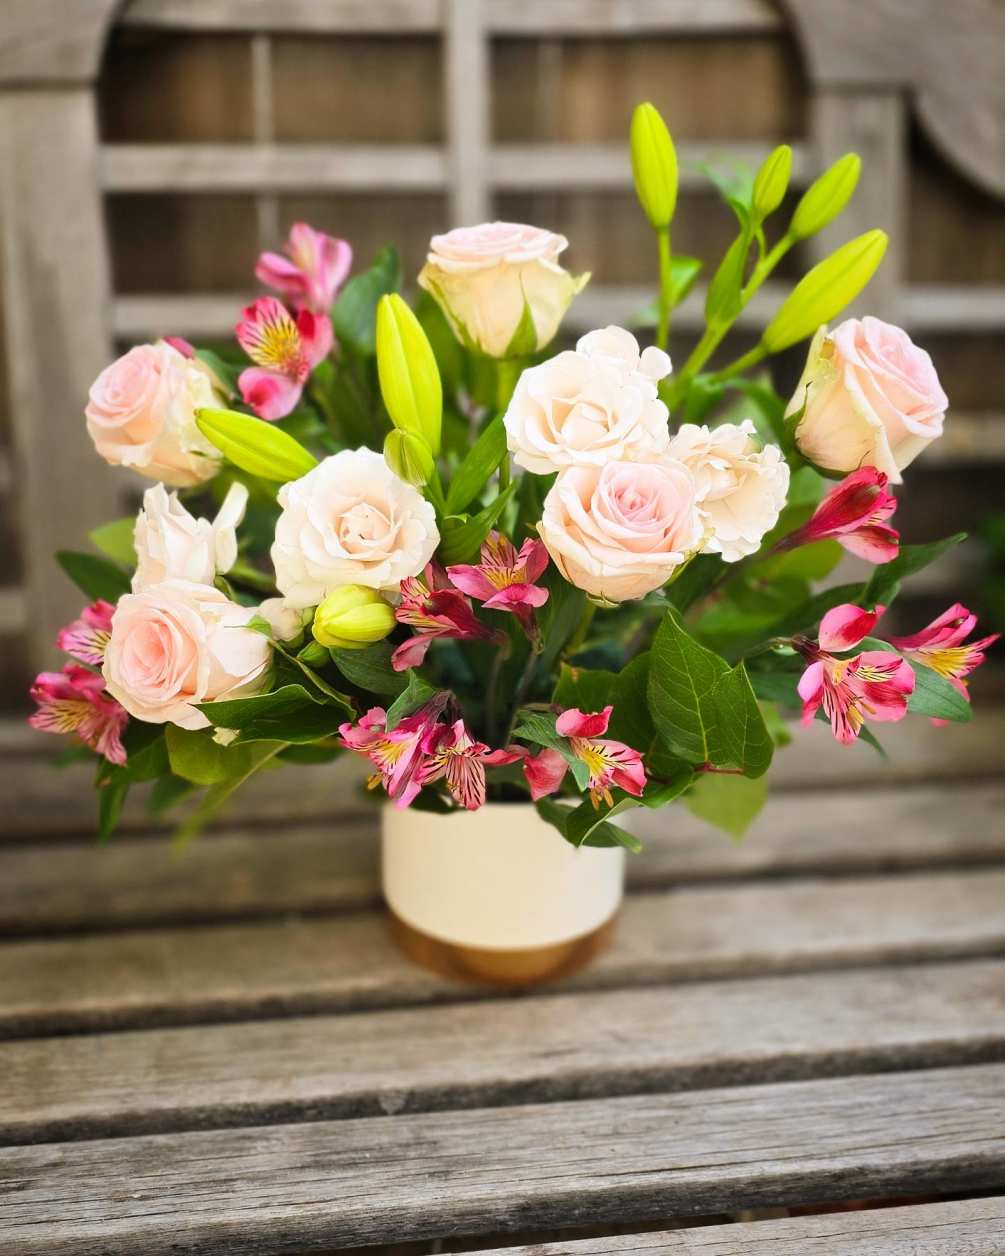 This arrangement is delivered in a white ceramic and features soft pink